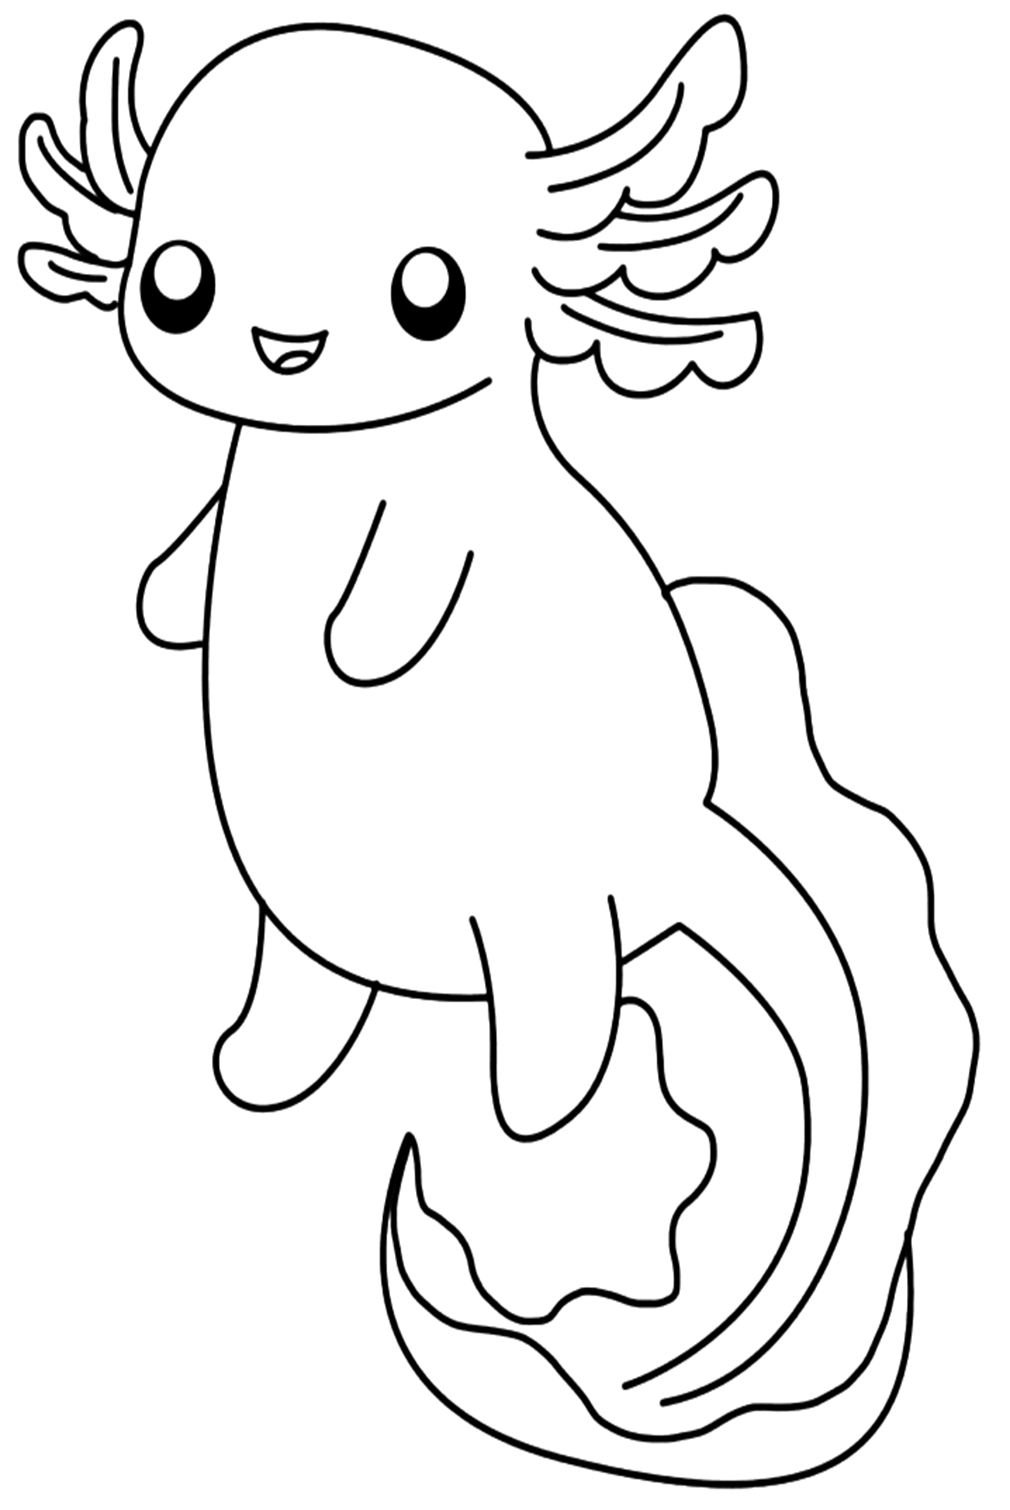 Lovely Axolotl Coloring Pages